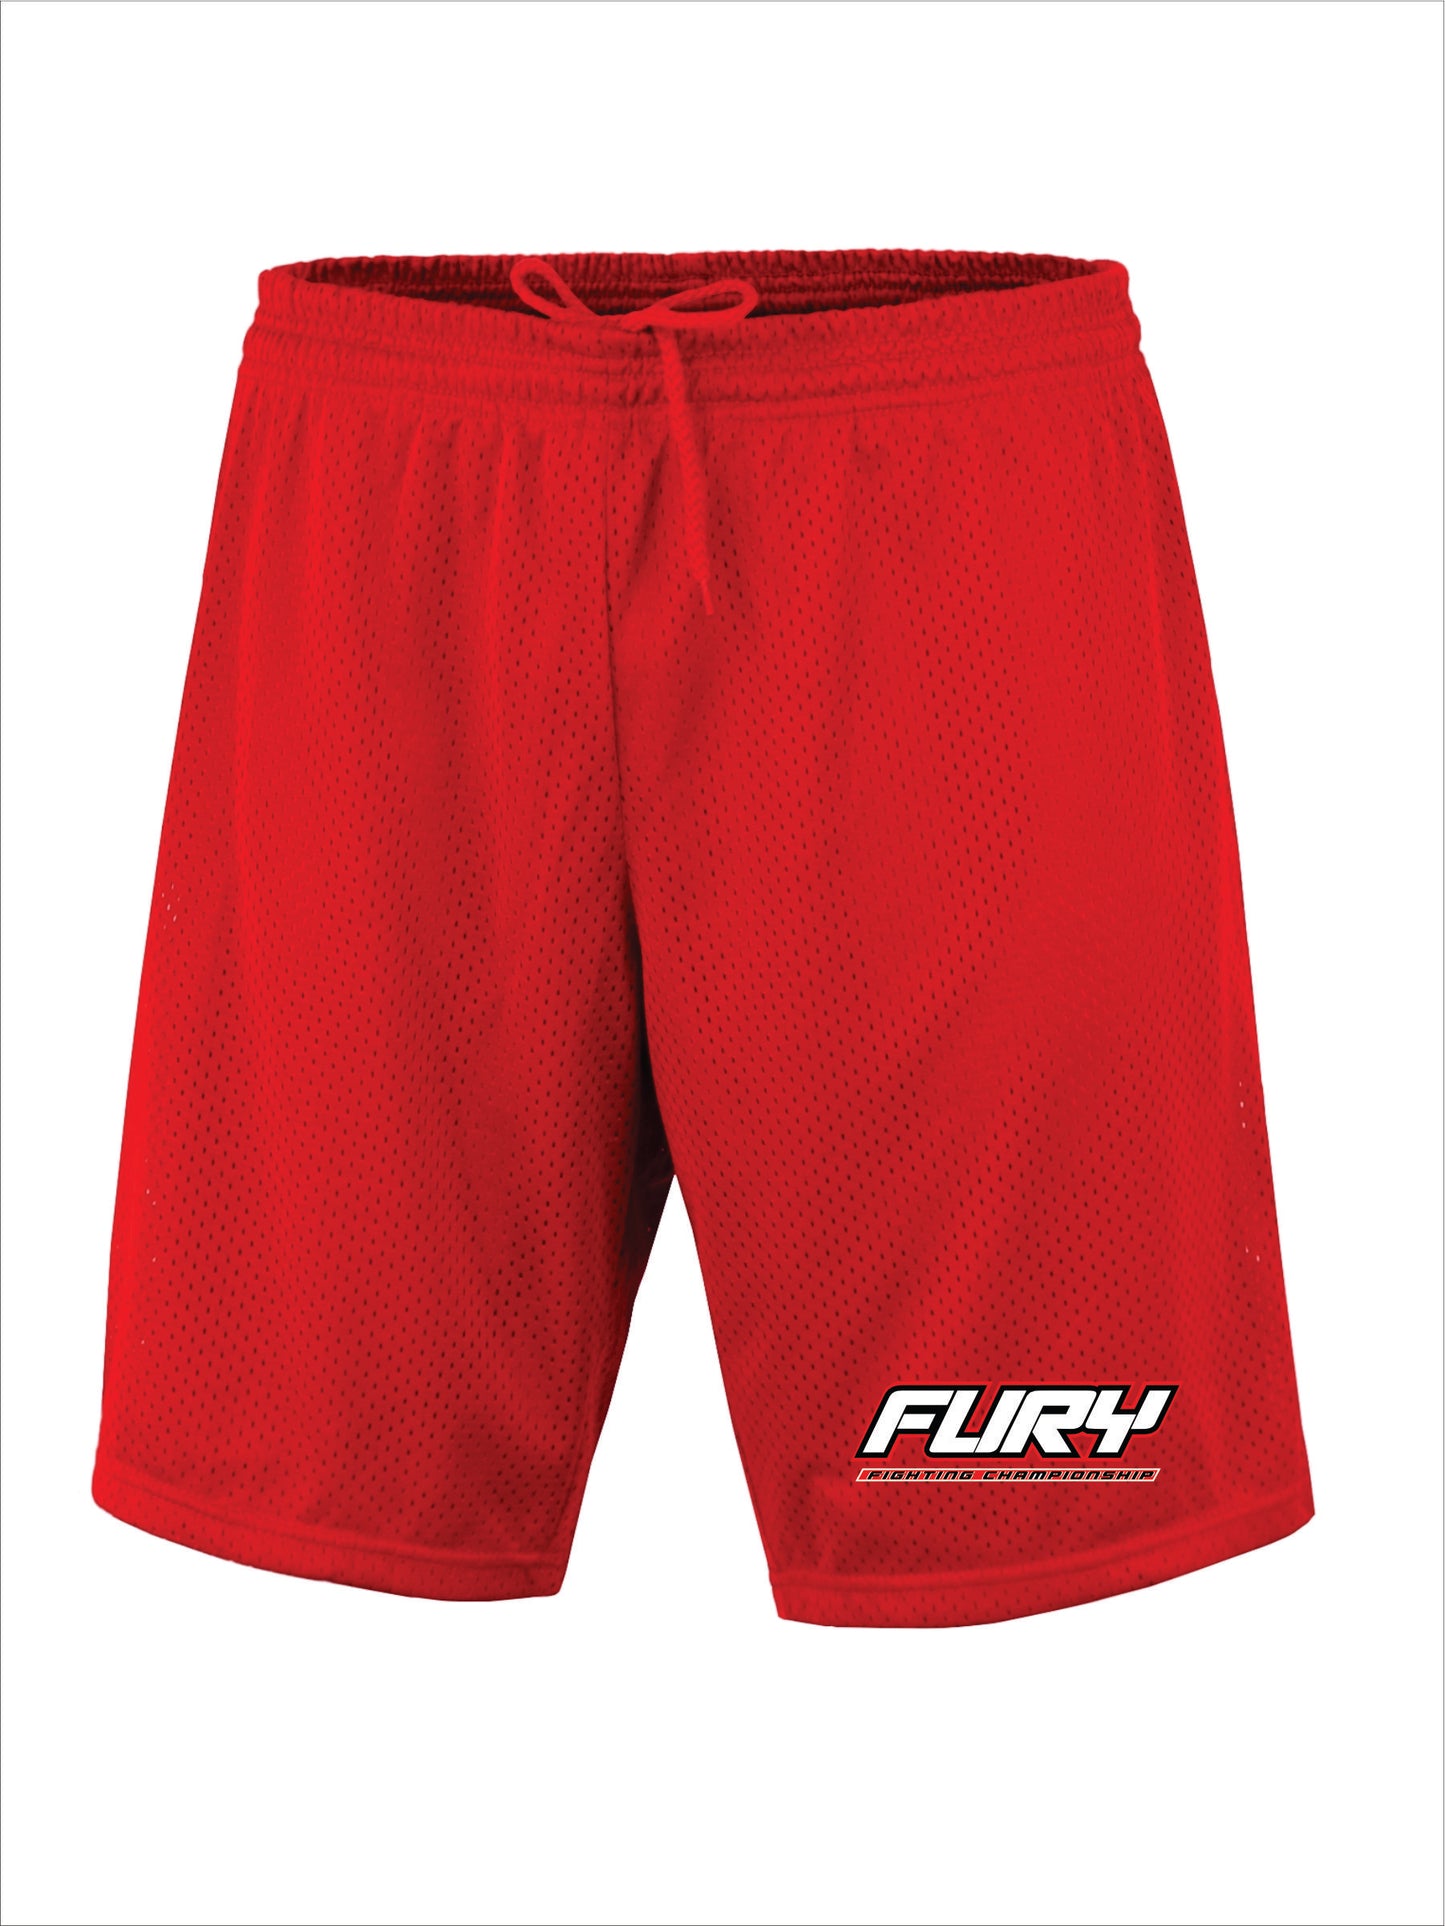 Fury Embroidered Mesh Shorts